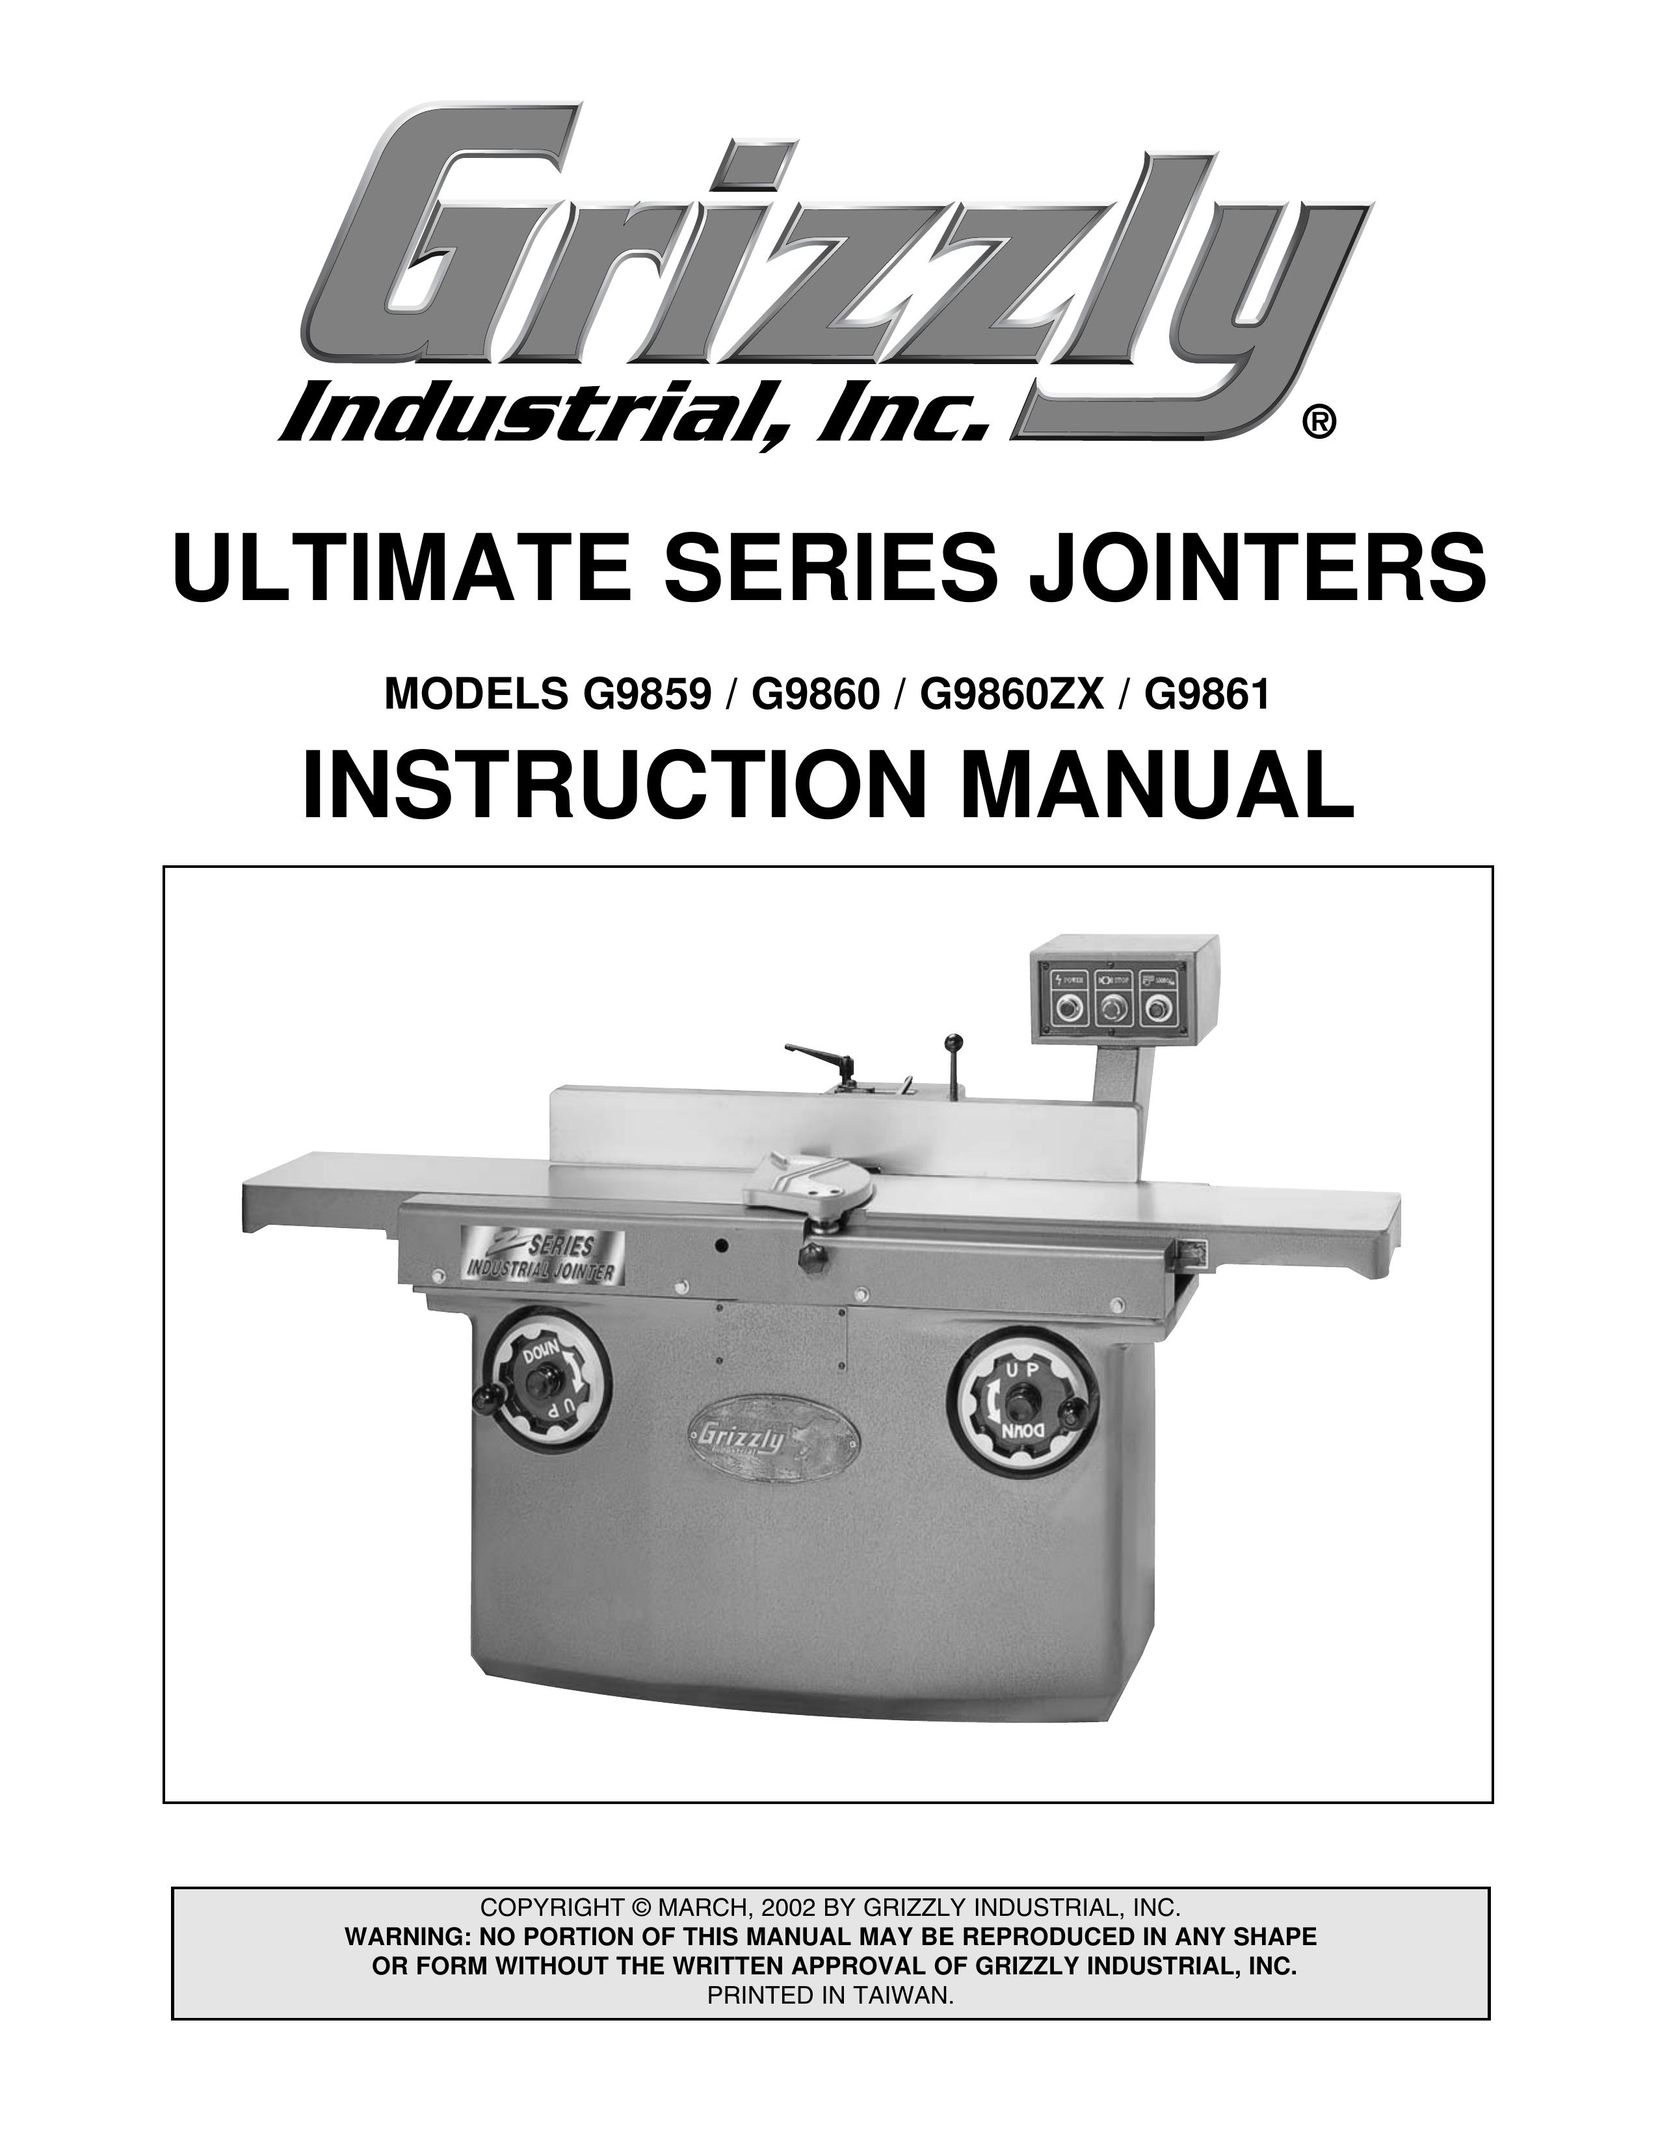 Grizzly G9859 Biscuit Joiner User Manual